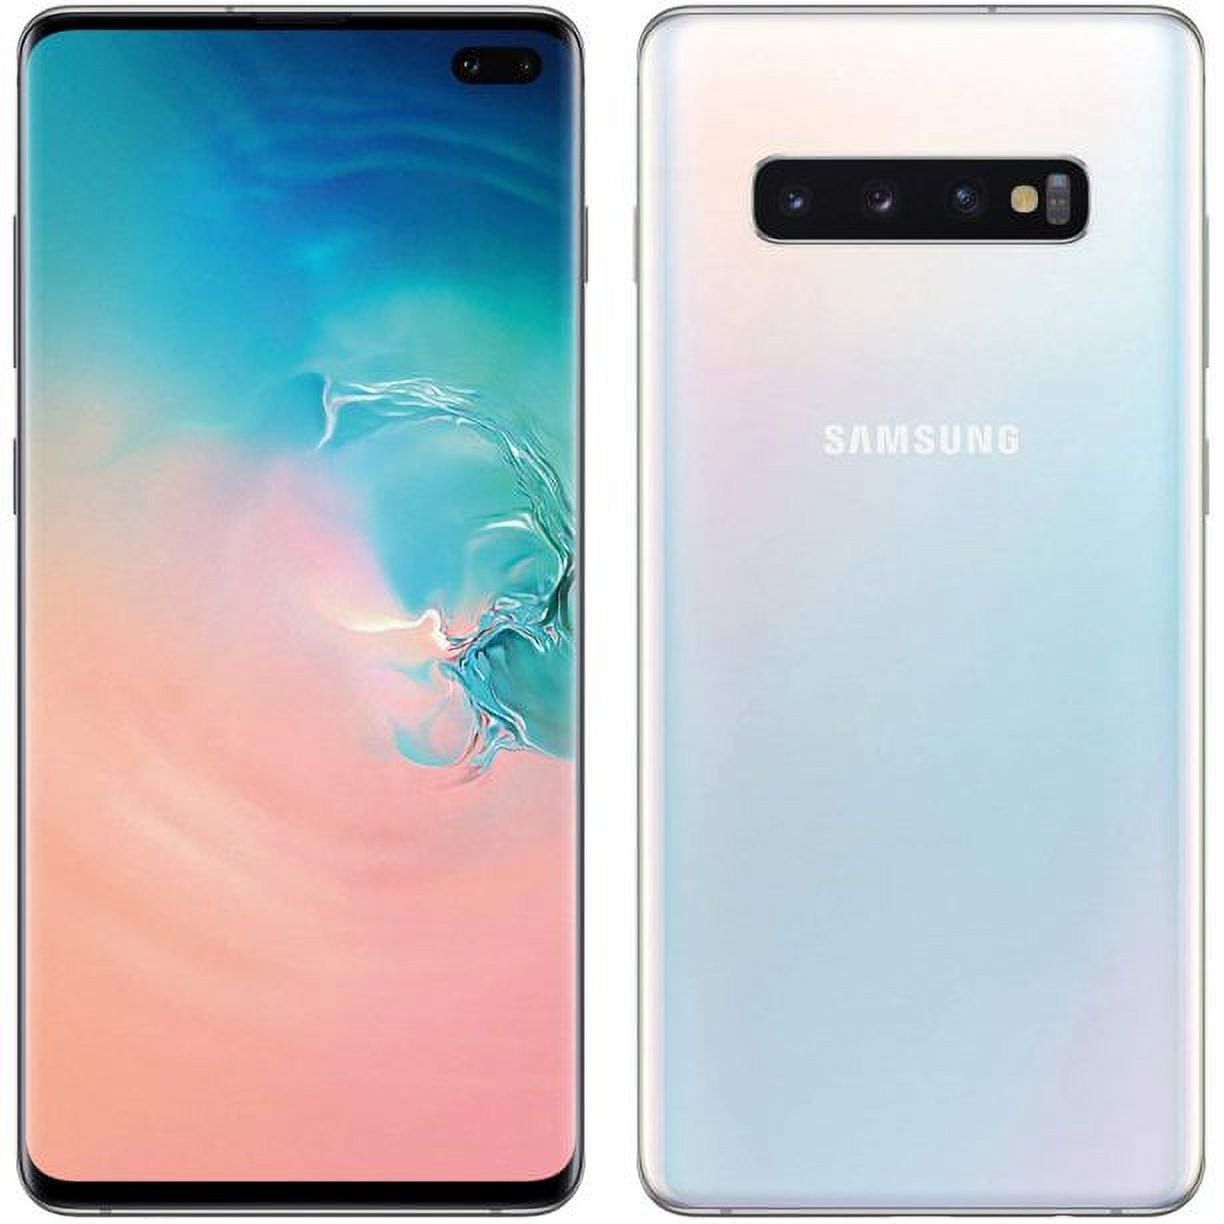 Pre-Owned Samsung Galaxy S10+ Plus 128GB Prism White G975 Prism White GSM Unlocked (AT&T / T-Mobile) Smartphone (Refurbished: Good) - image 1 of 2